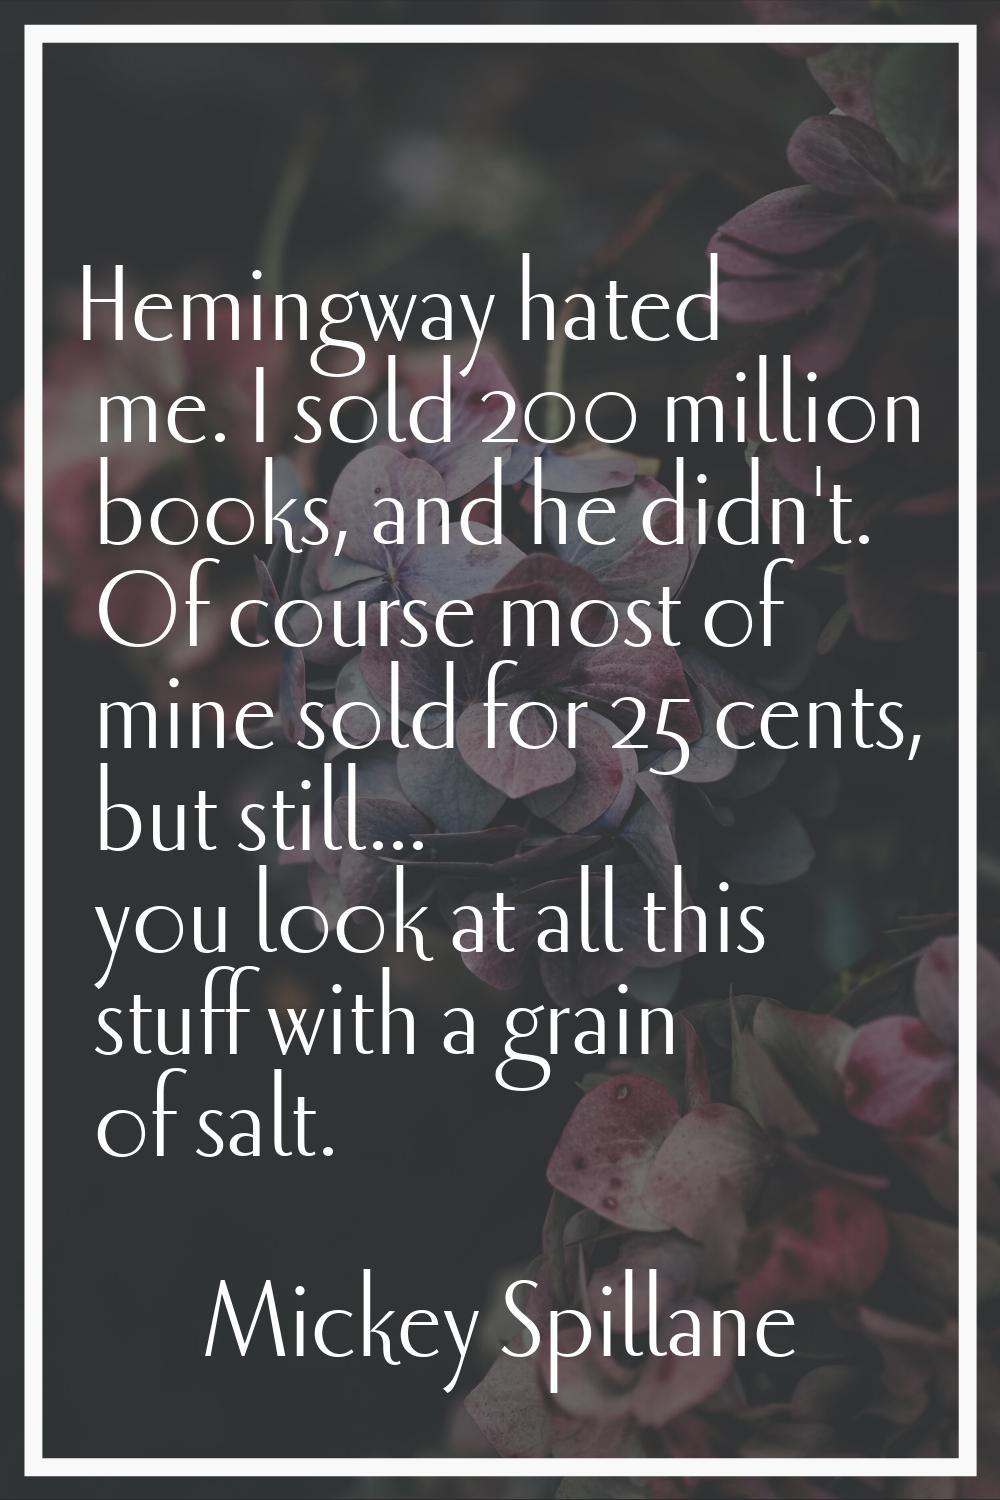 Hemingway hated me. I sold 200 million books, and he didn't. Of course most of mine sold for 25 cen